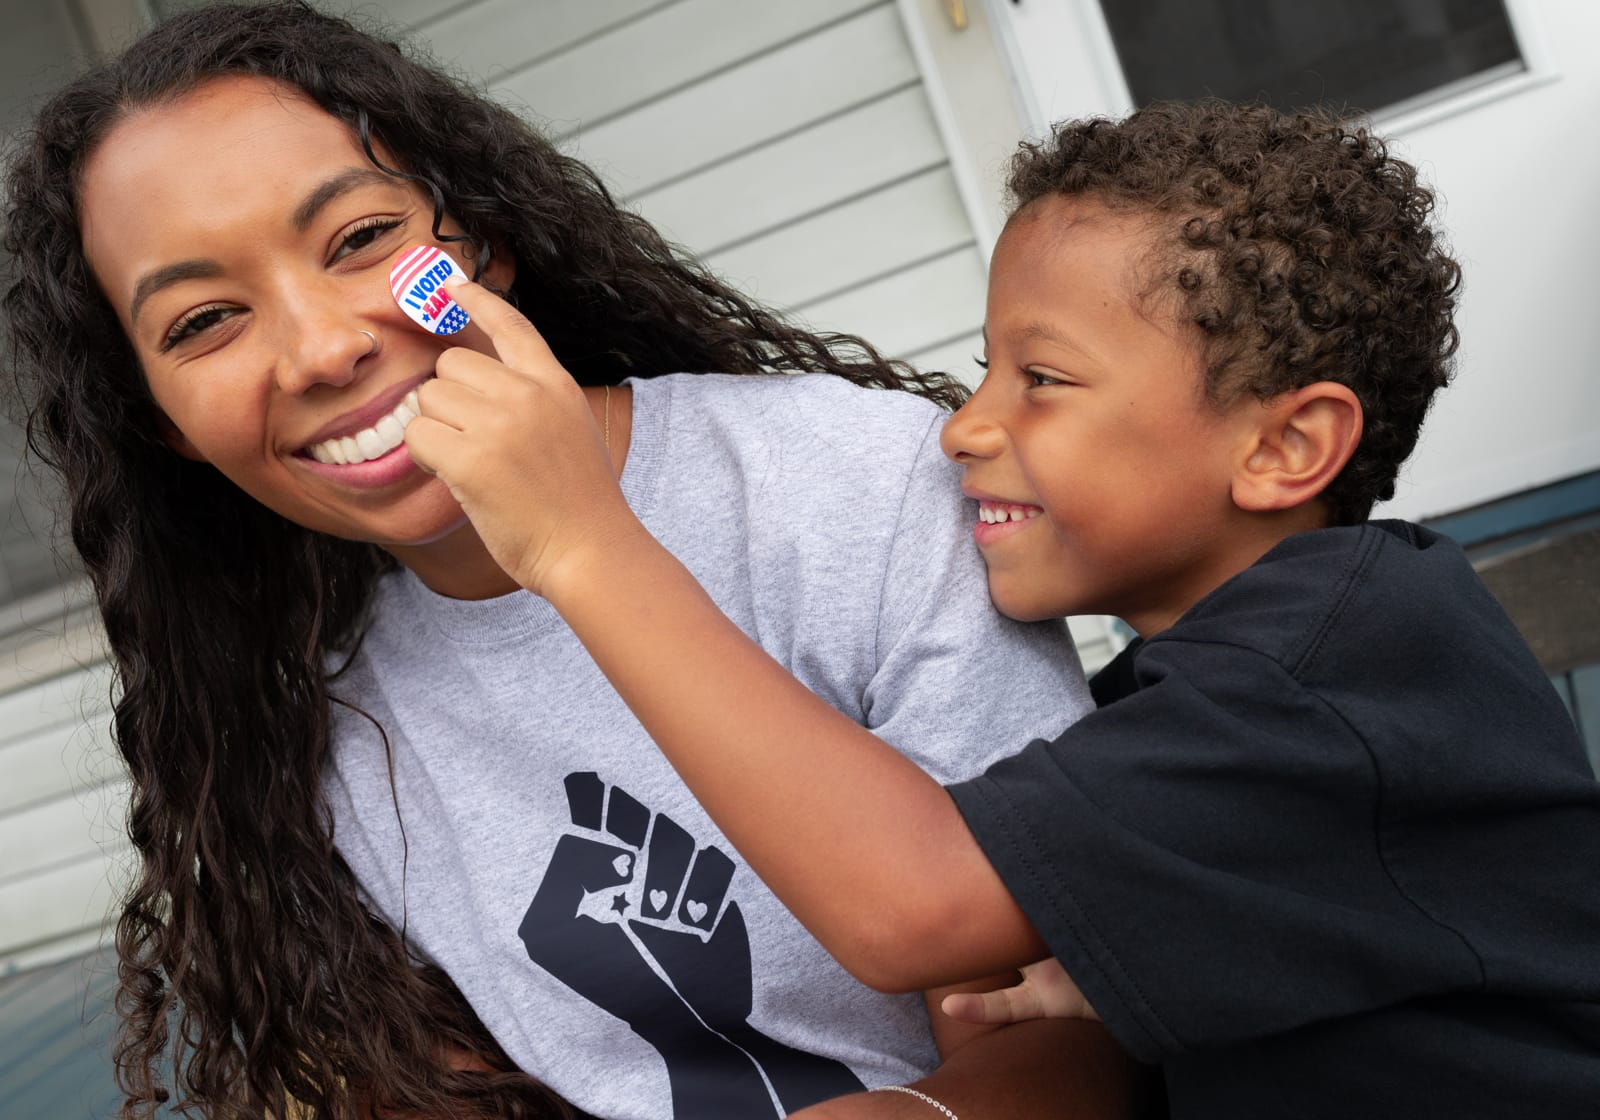 Black mother wearing BLM t-shirt with child holding up an I voted sticker